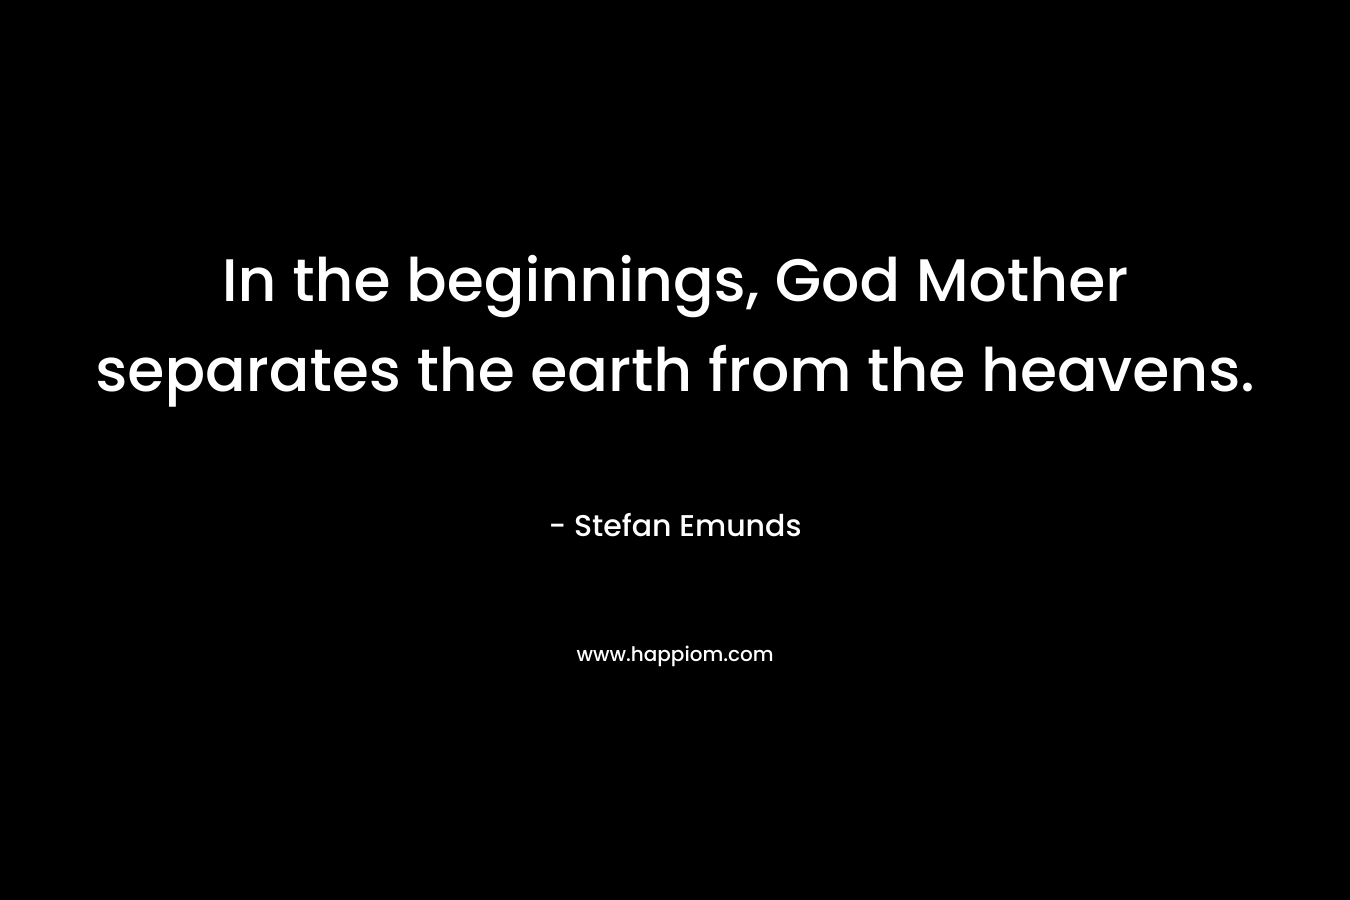 In the beginnings, God Mother separates the earth from the heavens.